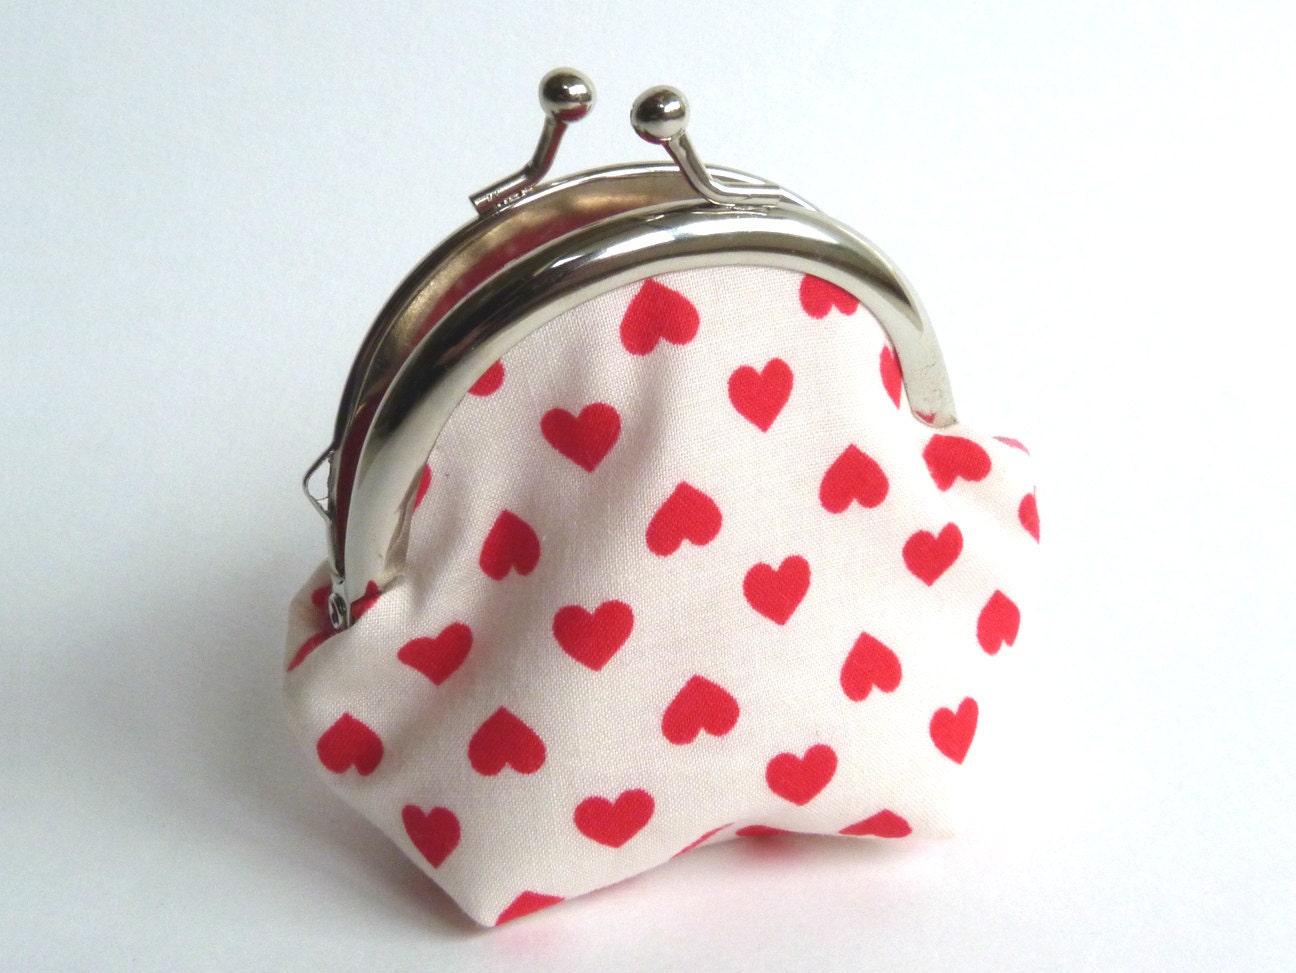 Red and White Love Heart Coin purse - iPod Earbud Case